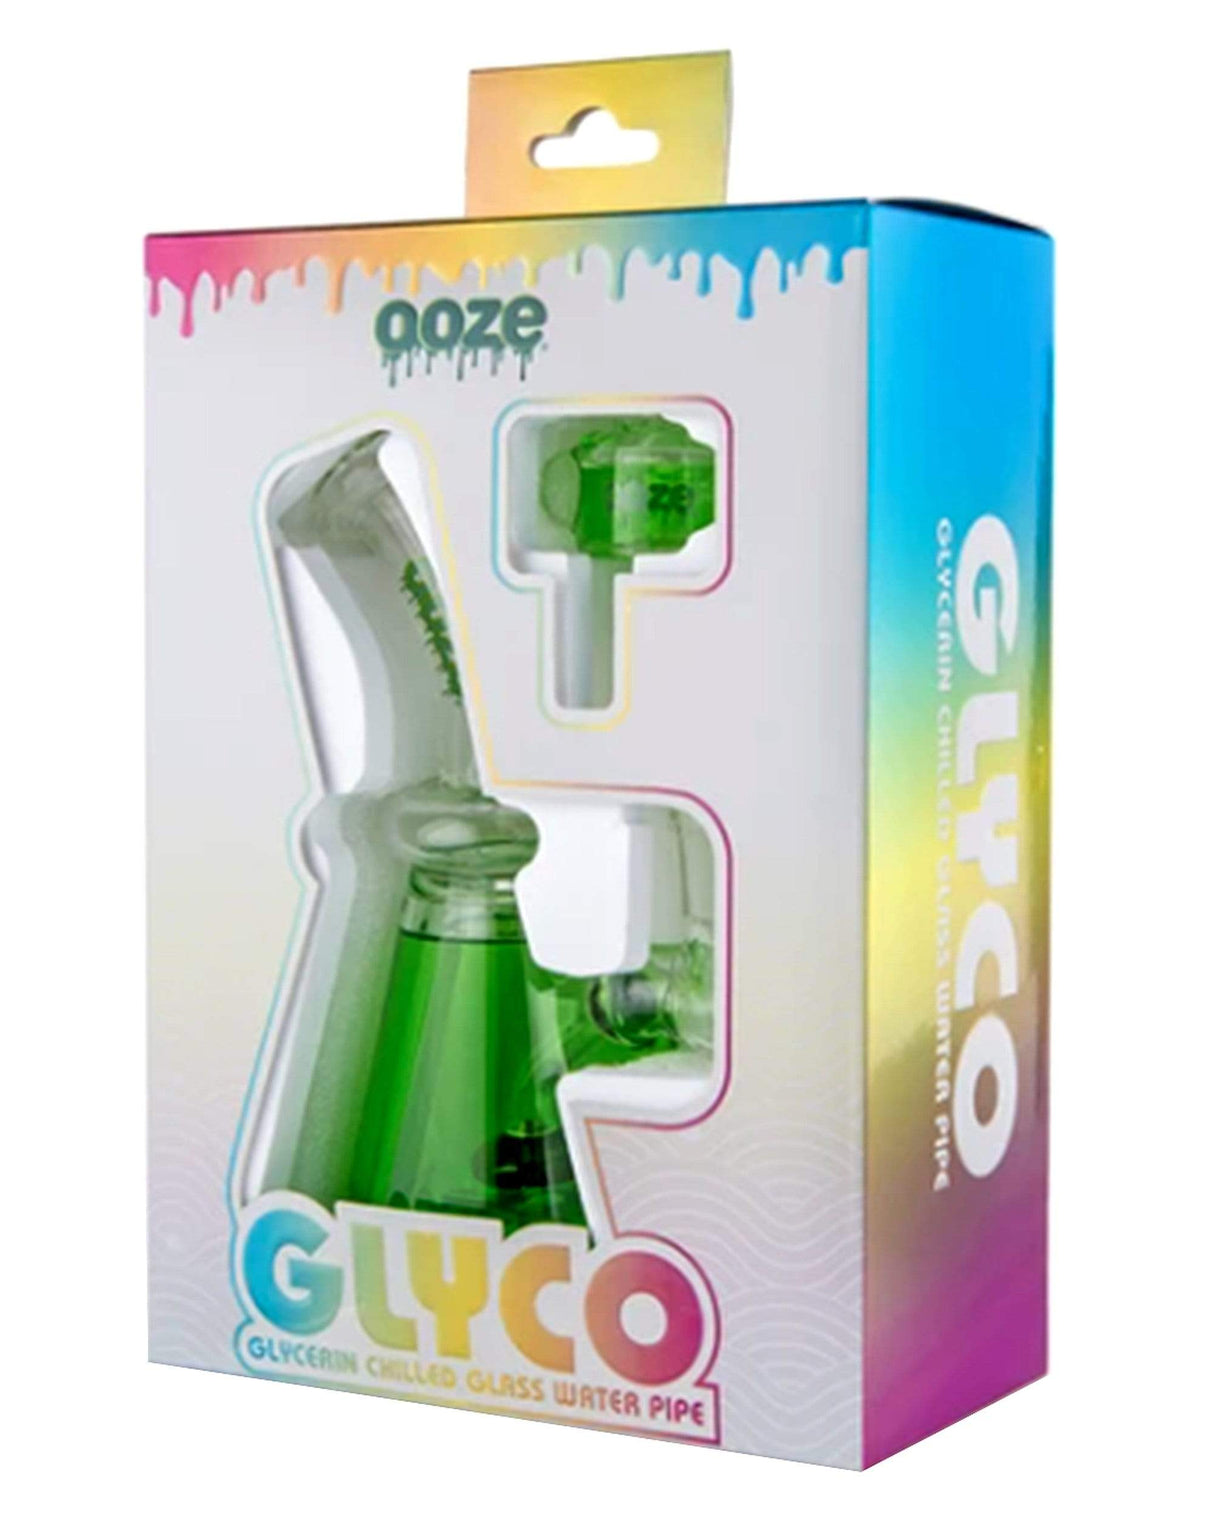 Ooze Glyco Glycerin Chilled Water Pipe in packaging, beaker design with percolator, 6" height, in green